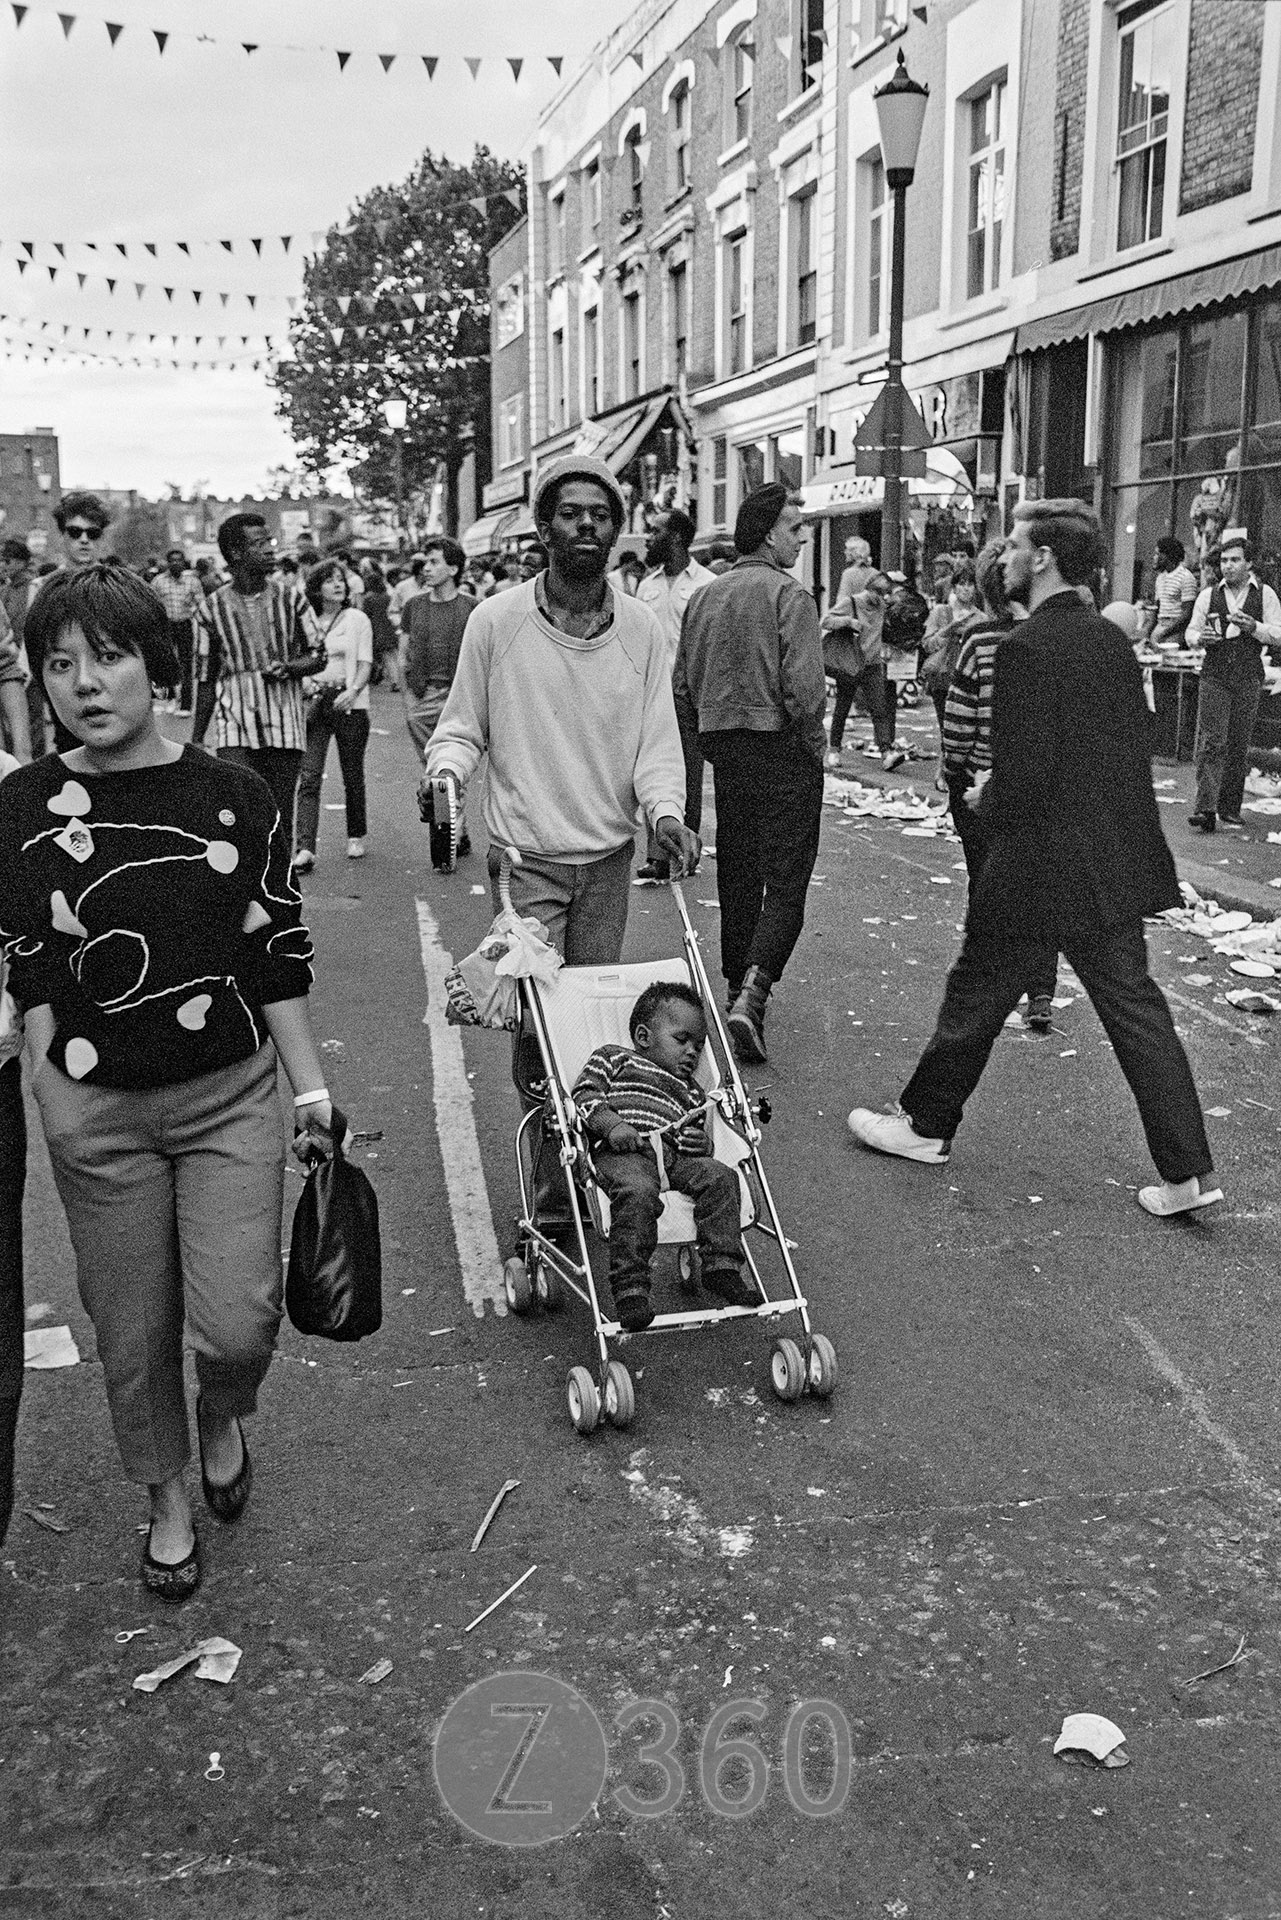 Notting Hill Carnival, London, August 1983